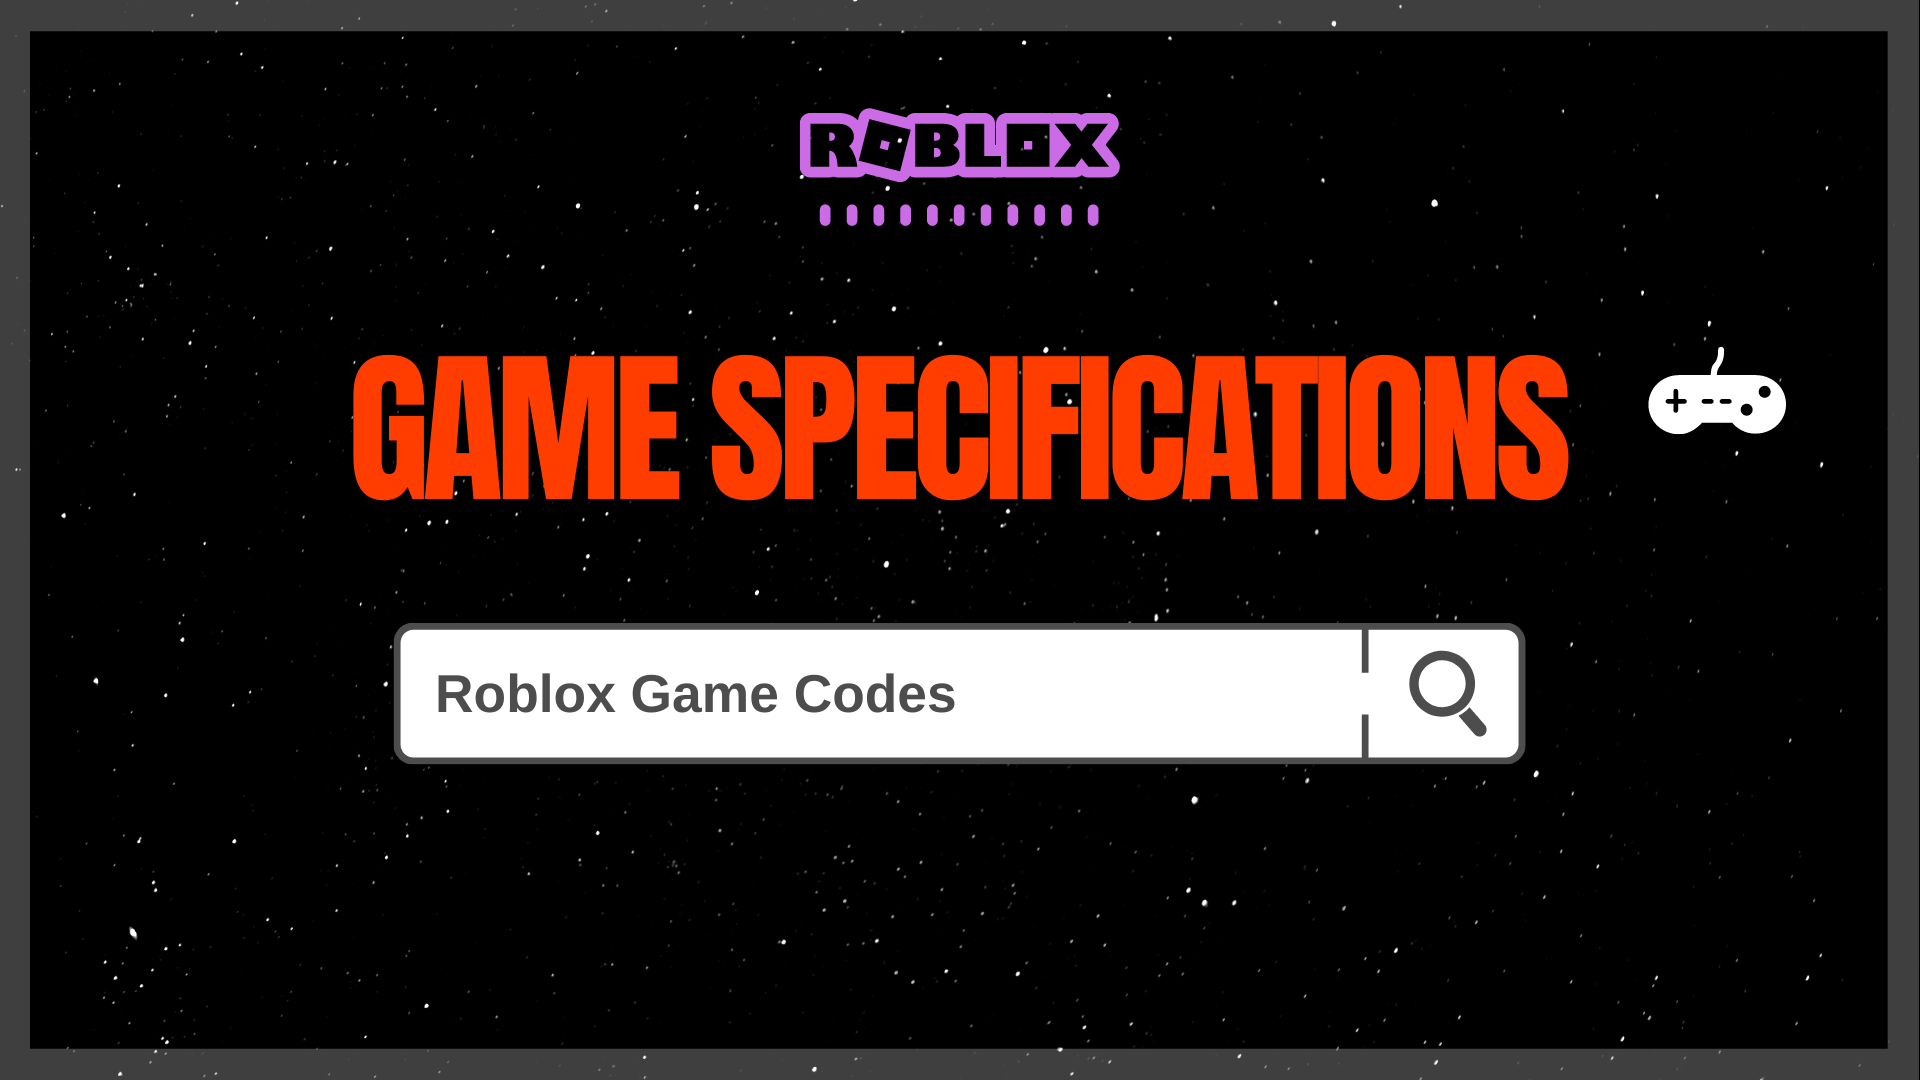 All In One Roblox Game Codes ᐈ Encylopedia Game Specifications - f is for friends who do stuff together roblox code